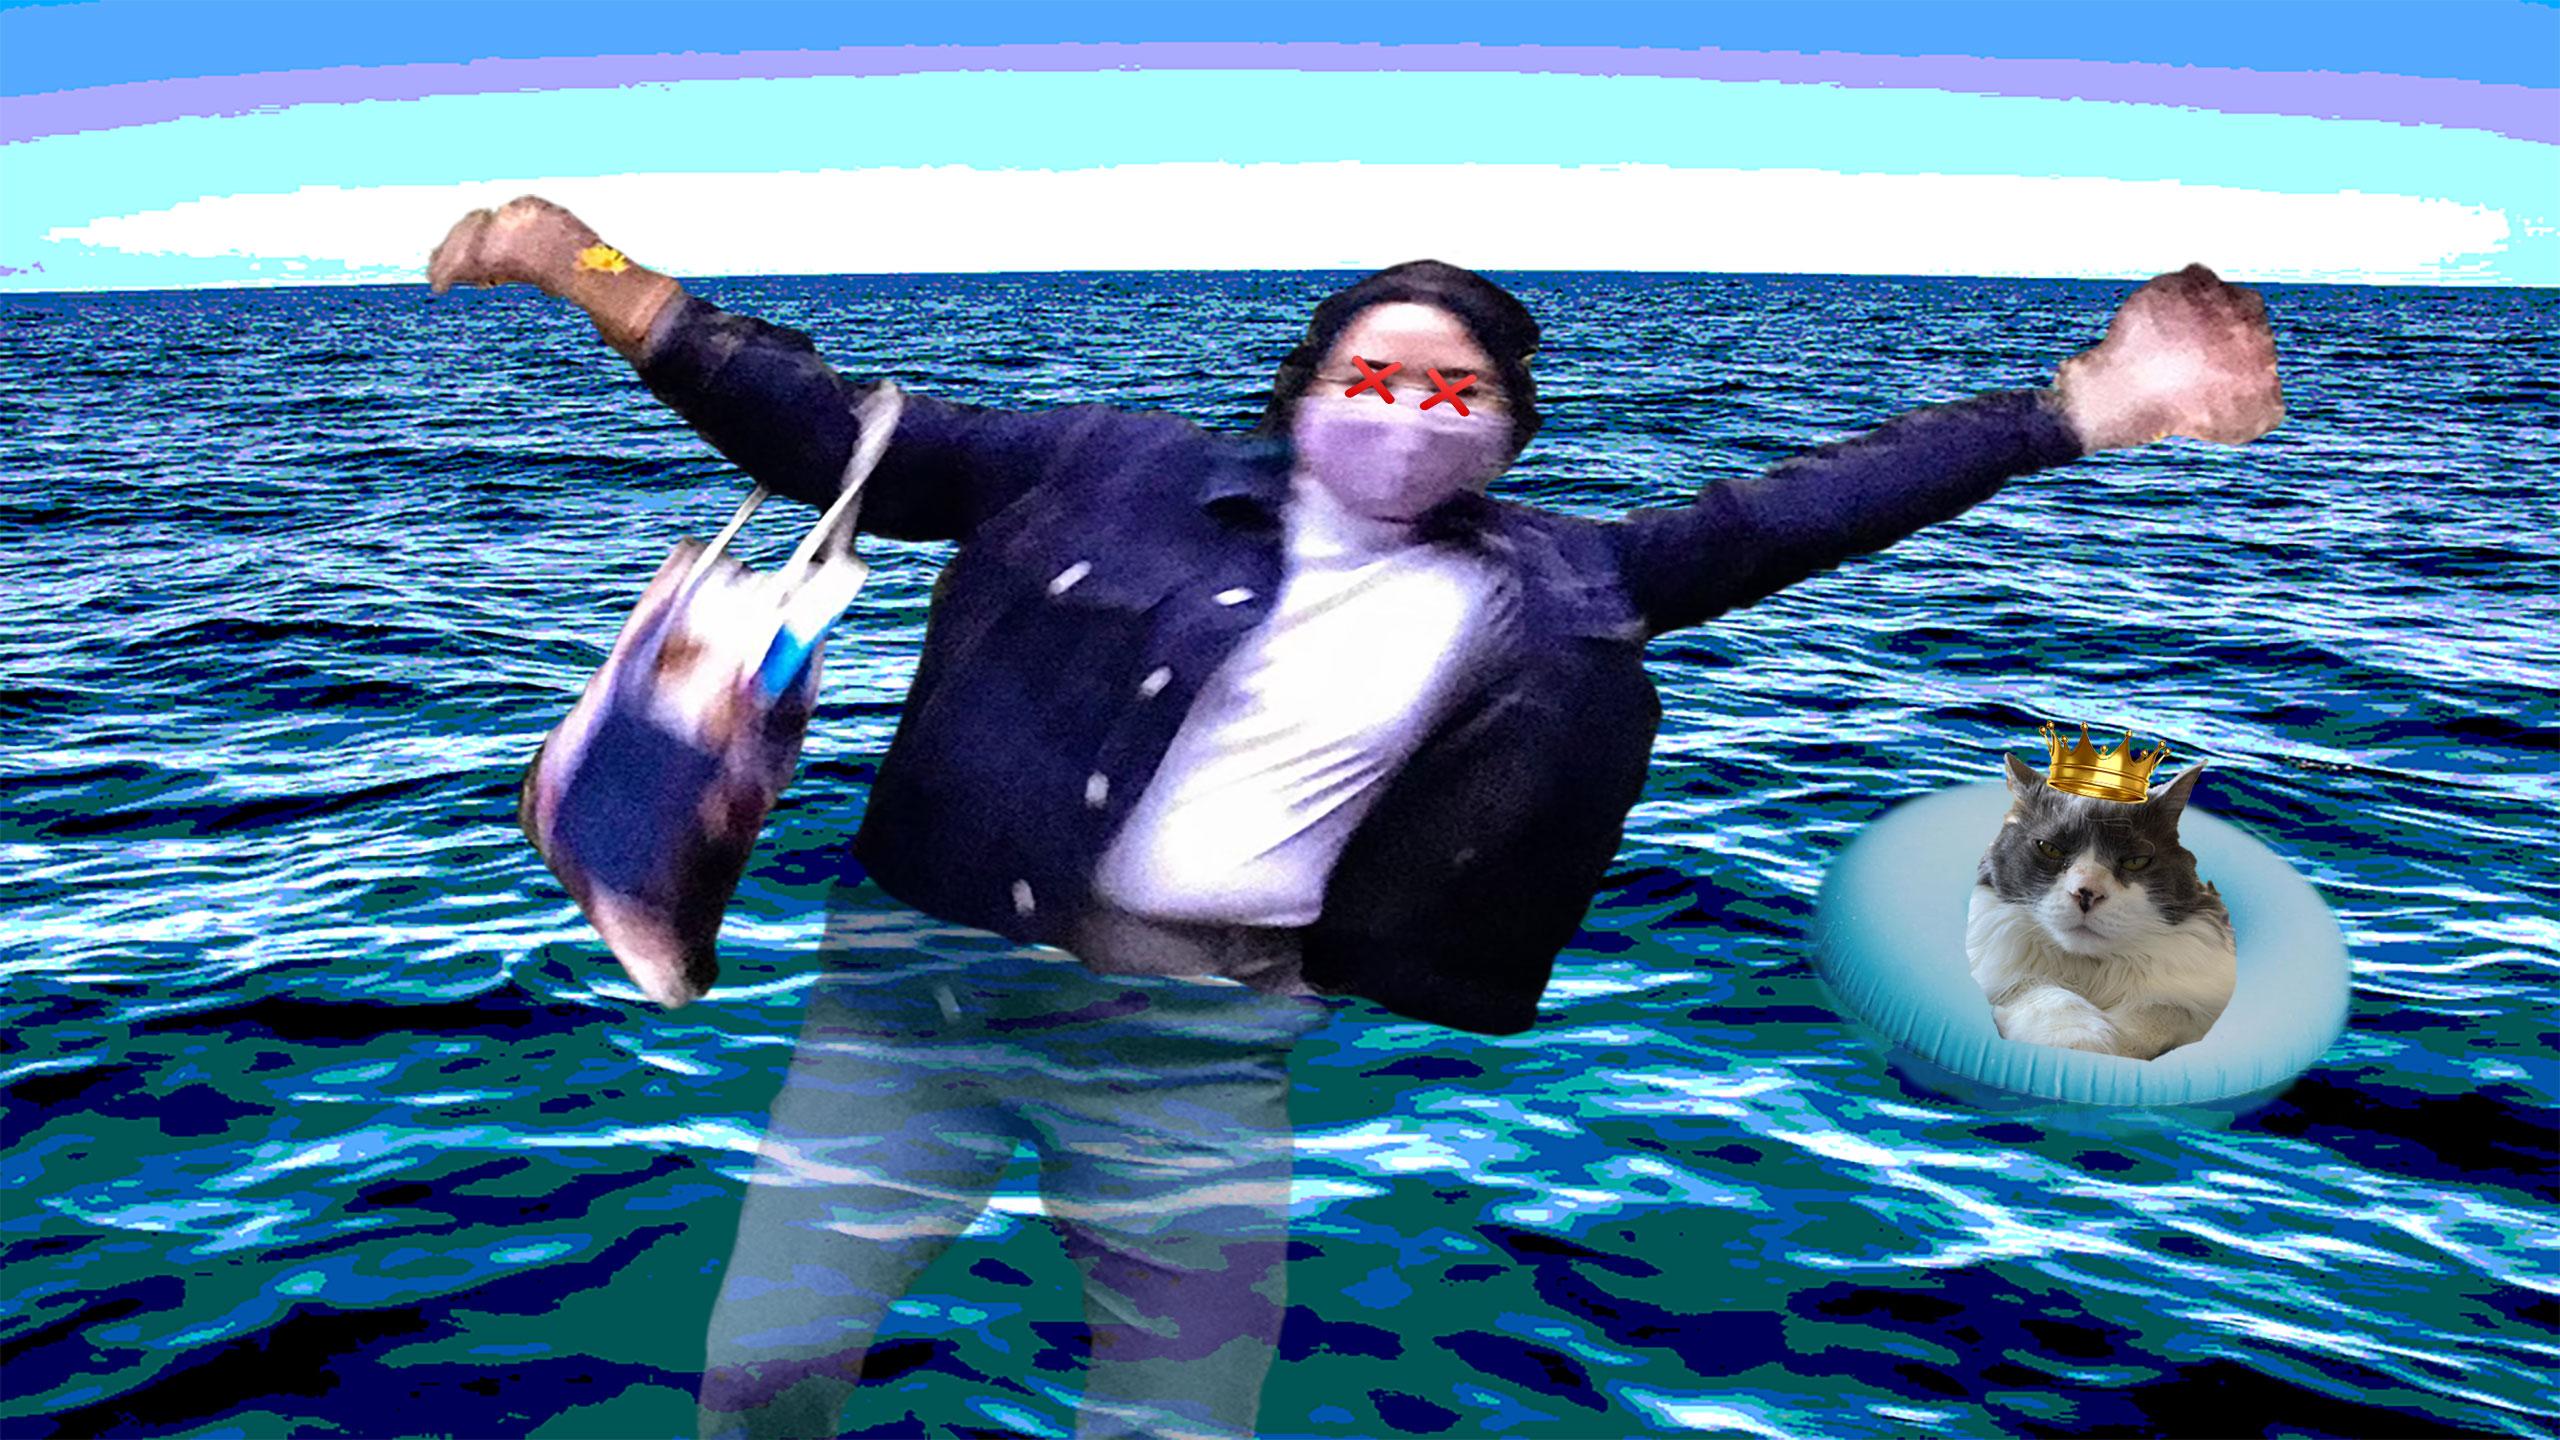 Photoshopped image of outgoing editor-in-chief Catherine Abes flailing her arms while drowning in a body of water. Catherine's cat Bella looks on beside her in a floaty.